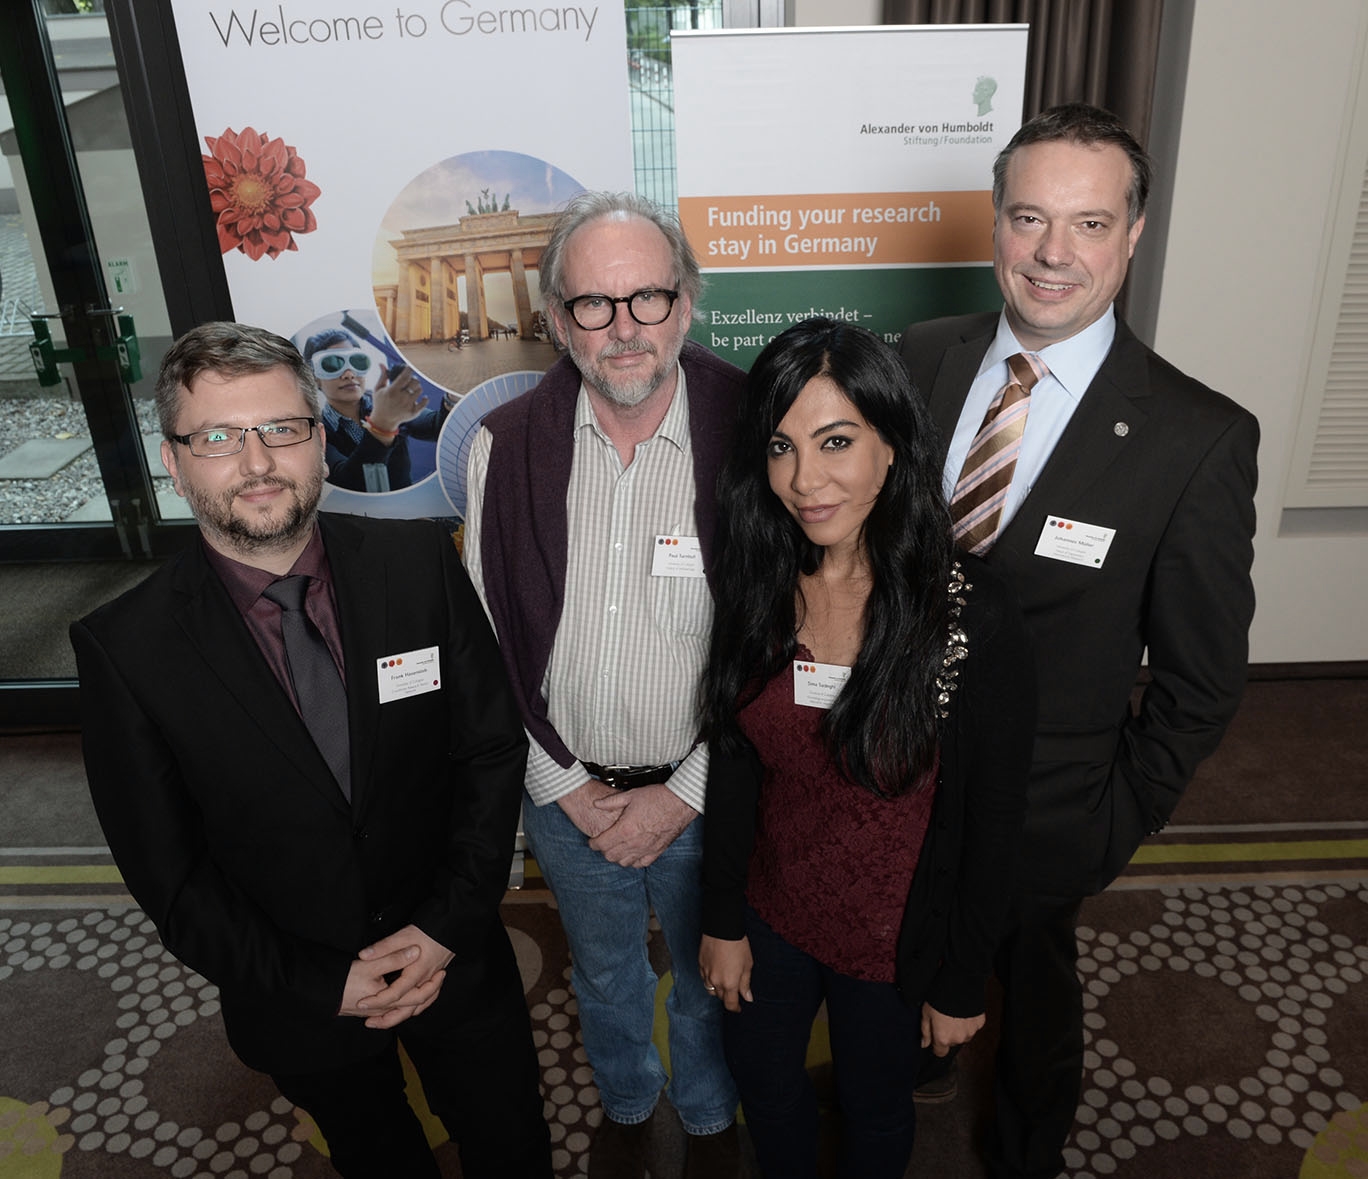 Prof. Dr. Paul Turnbull (2nd from the left) and Dr. Sima Sadeghi (2nd from the right) attended the conference as international researchers at the University of Cologne accompanied by Dr. Johannes Müller (on the right) and Frank Hasenstab (on the left) from Albert's Global Researcher Network. Photo: Alexander von Humboldt Foundation / Ausserhofer